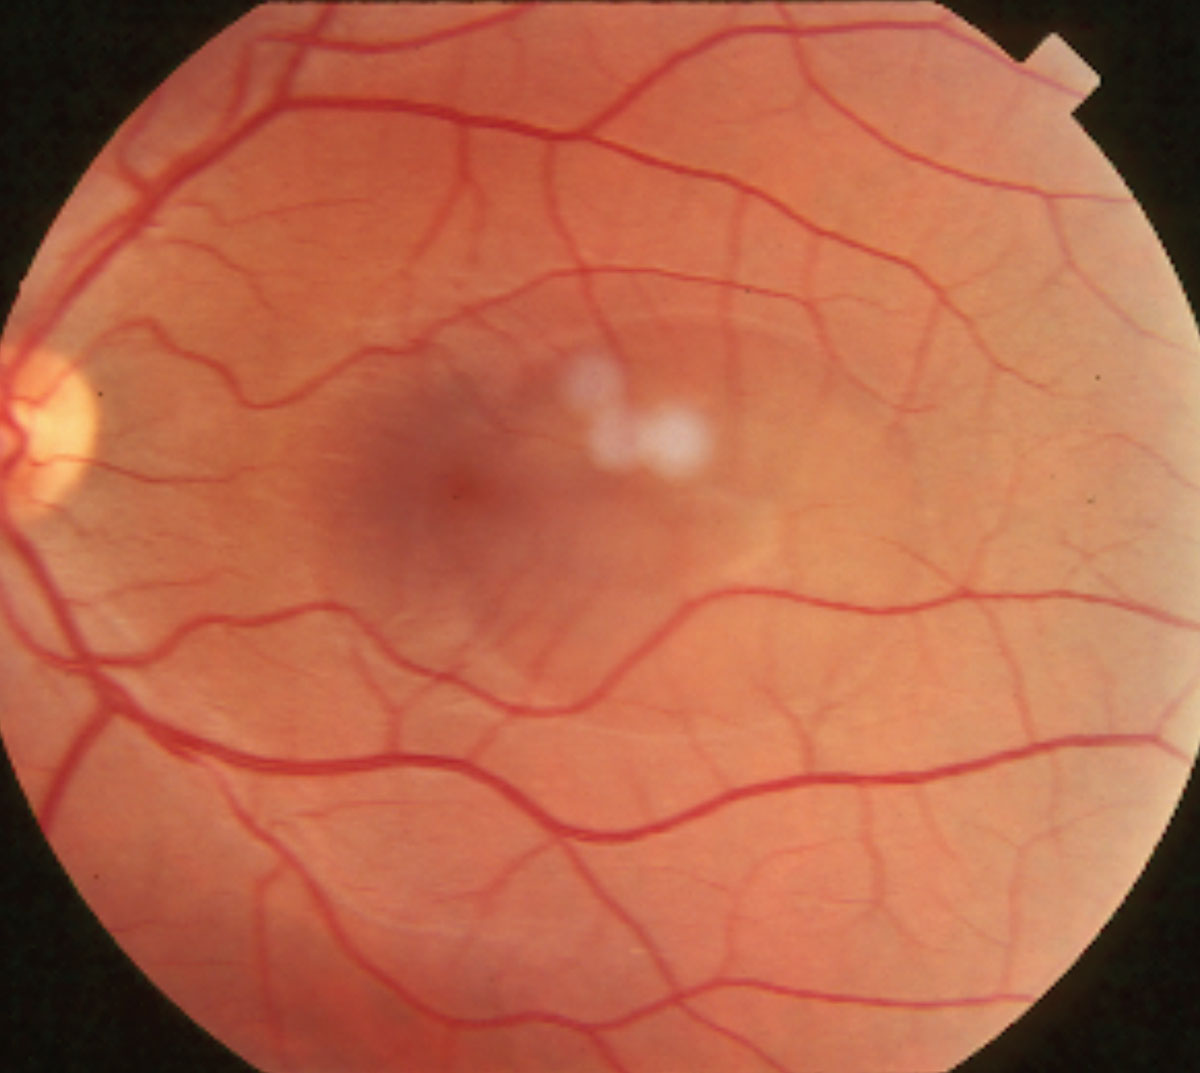 This patient’s fundus photo shows a large paracentral central serous chorioretinopathy. This pathology can cause sudden-onset blurred vision and decreased color perception in addition to other complaints.